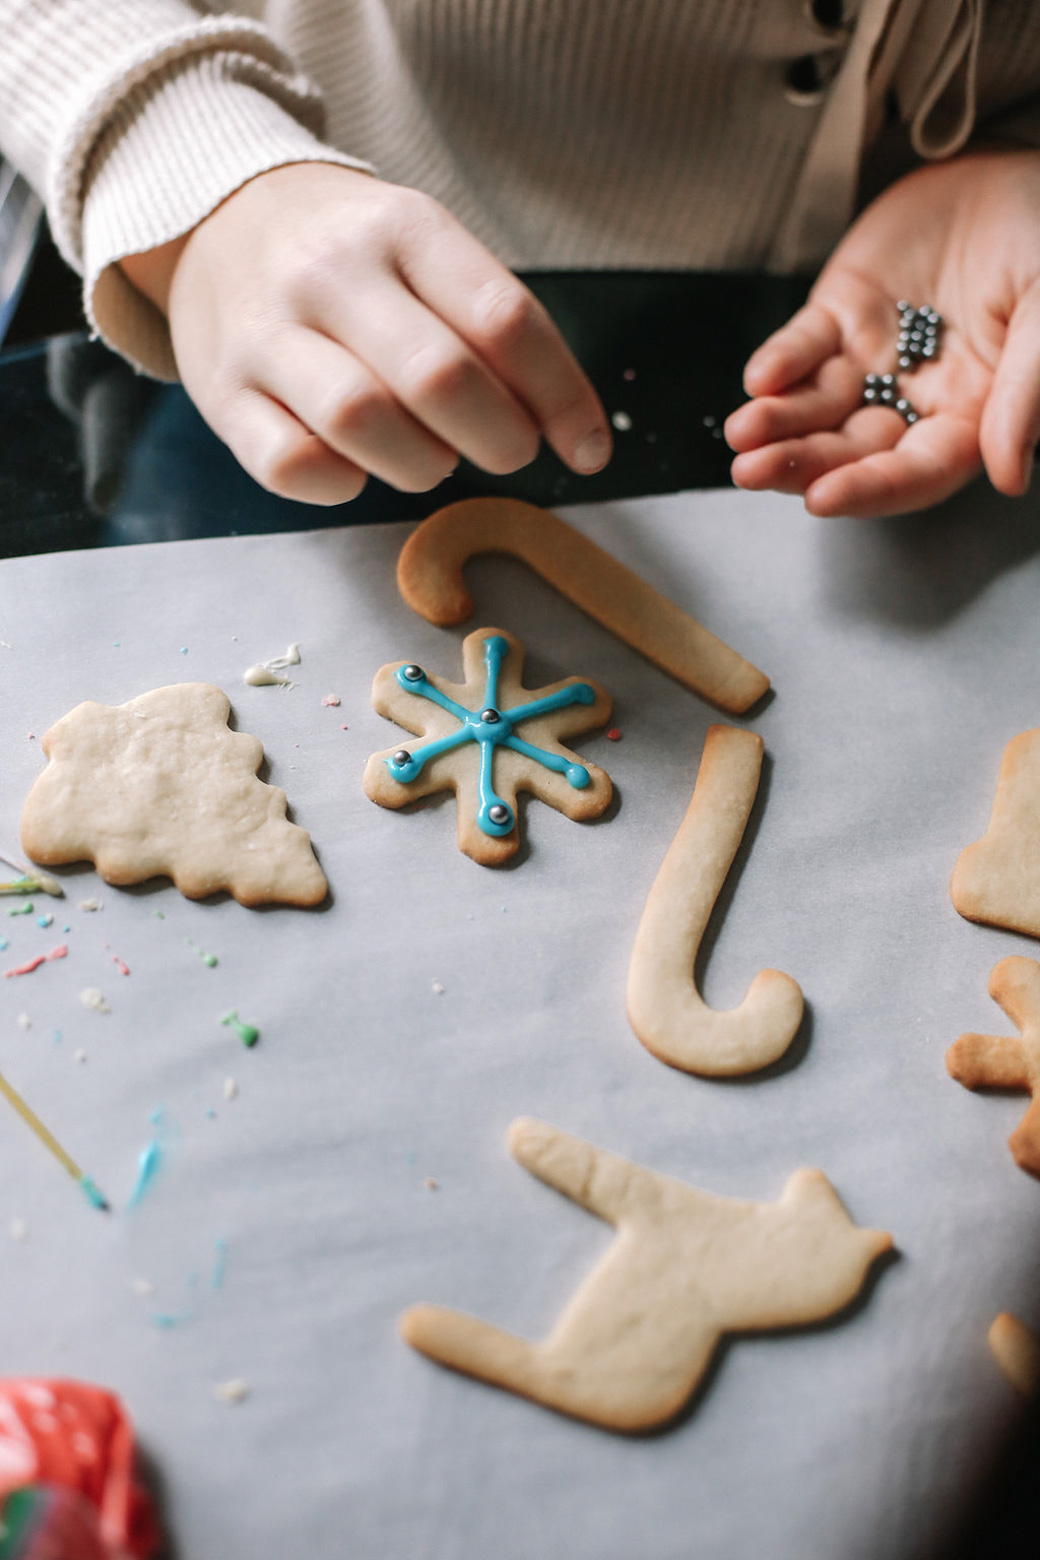 Carrying on Holiday Cookie Traditions